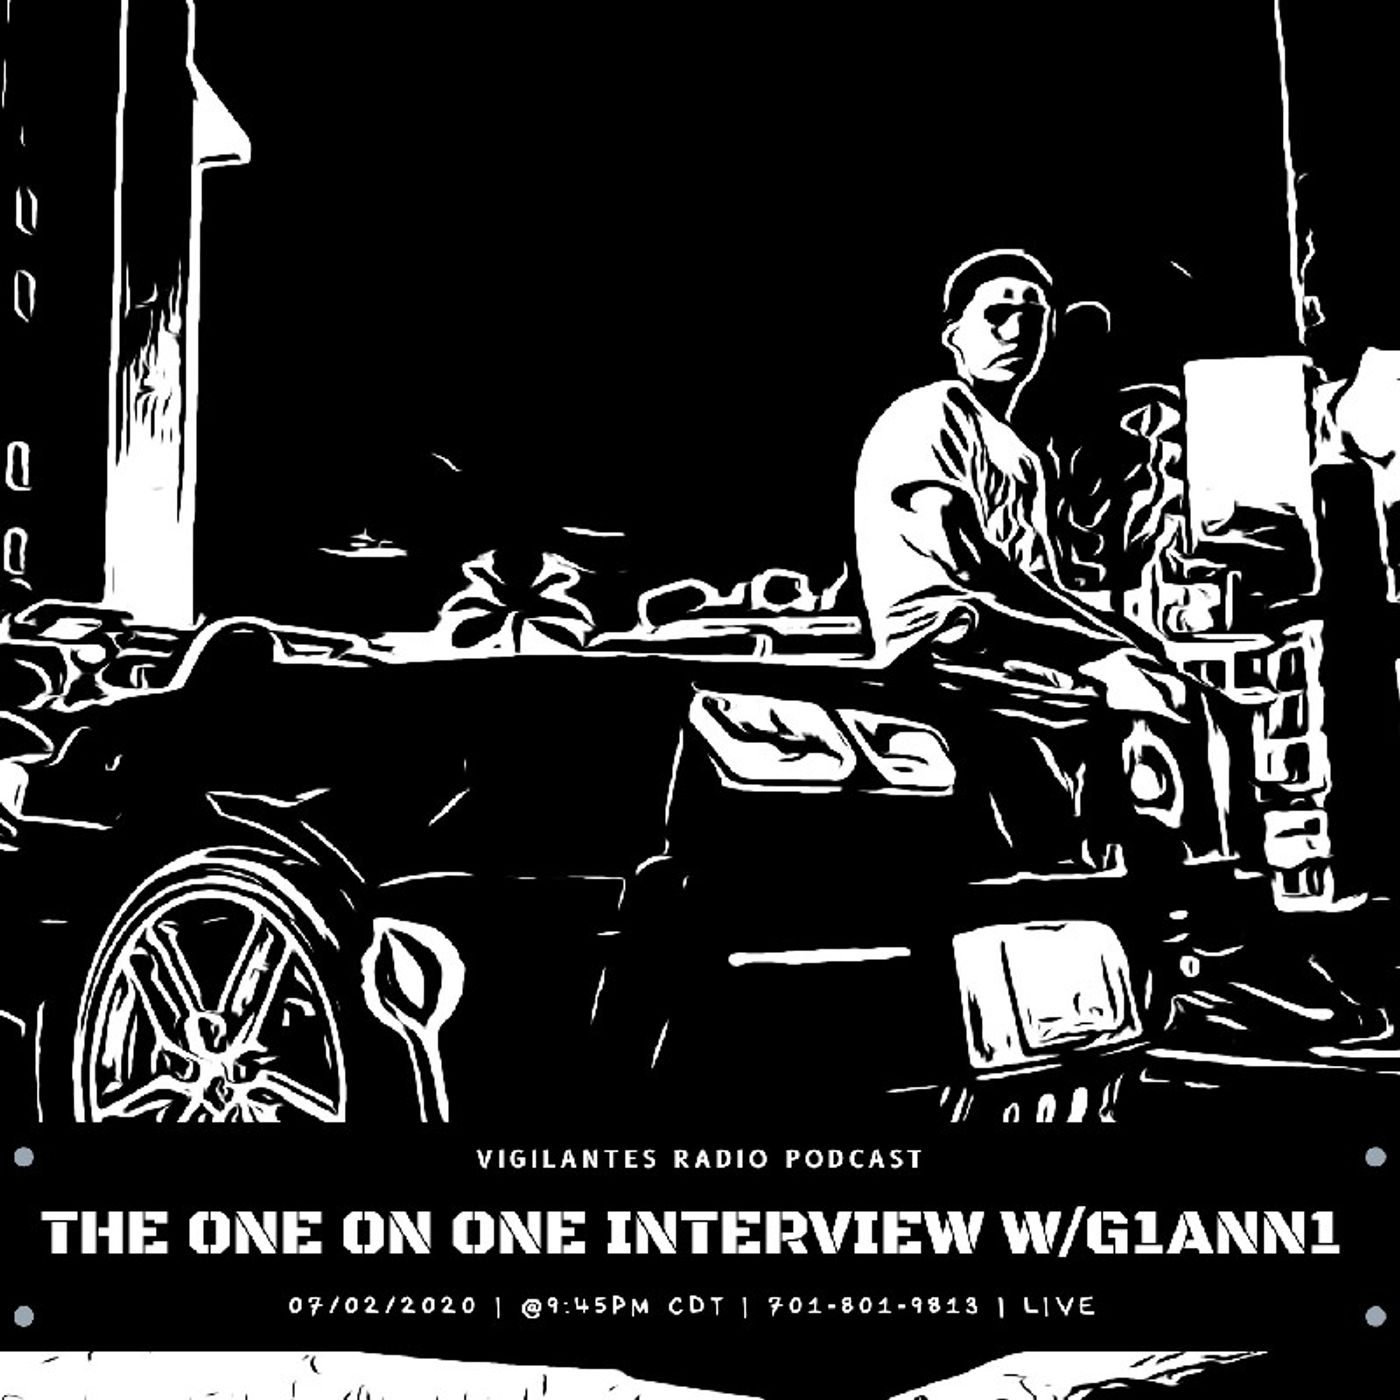 The One On One Interview w/G1ann1 Mariotti. Image